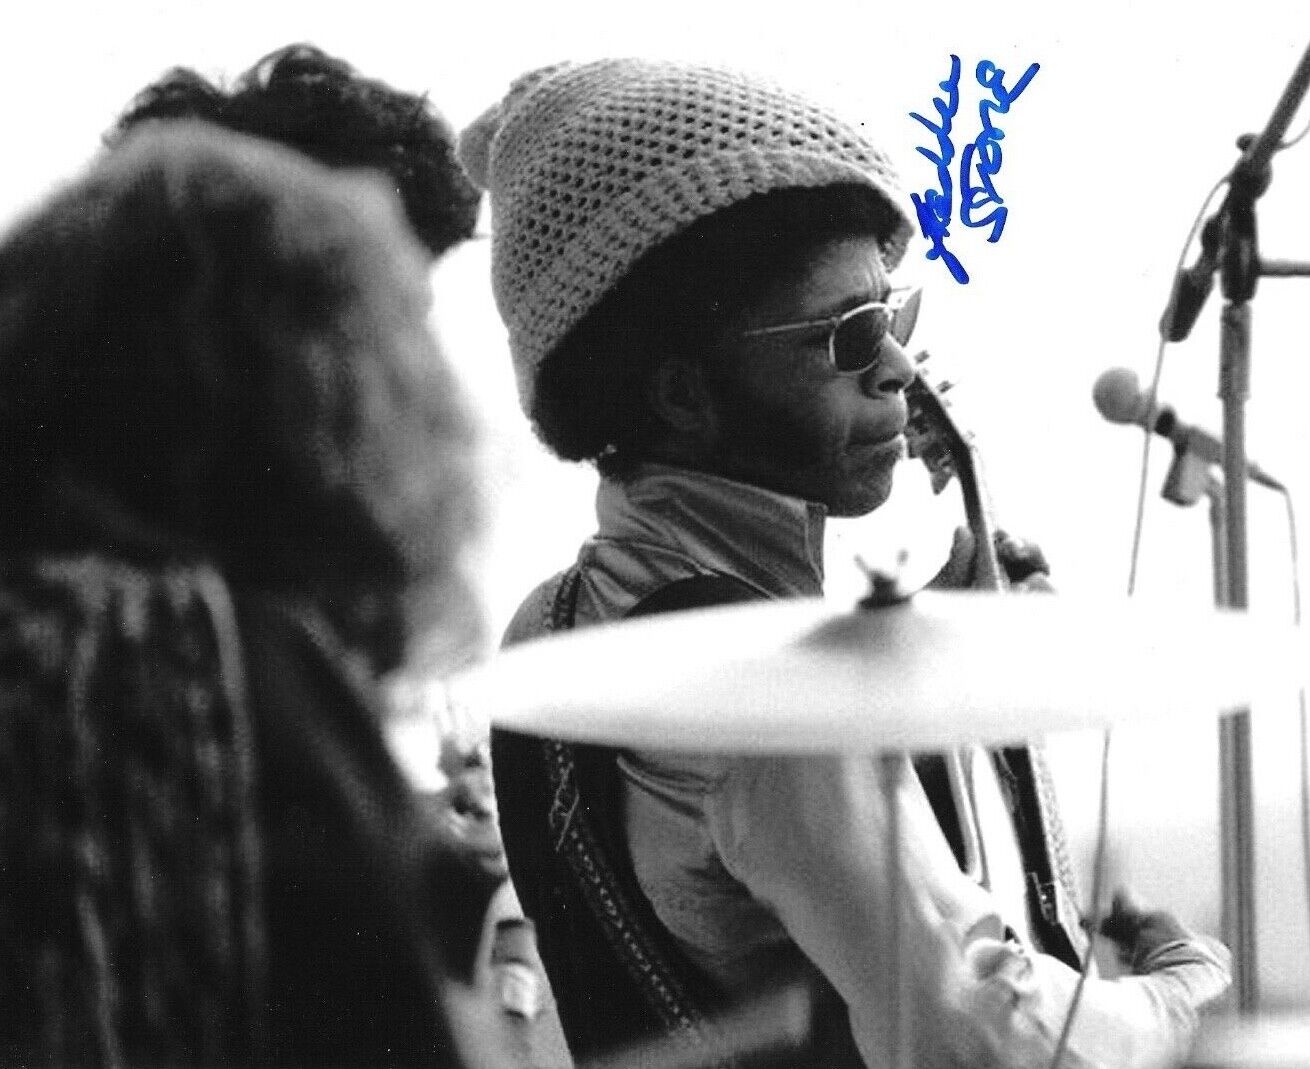 * FREDDIE STONE * signed 8x10 Photo Poster painting * SLY & THE FAMILY STONE * COA * 4